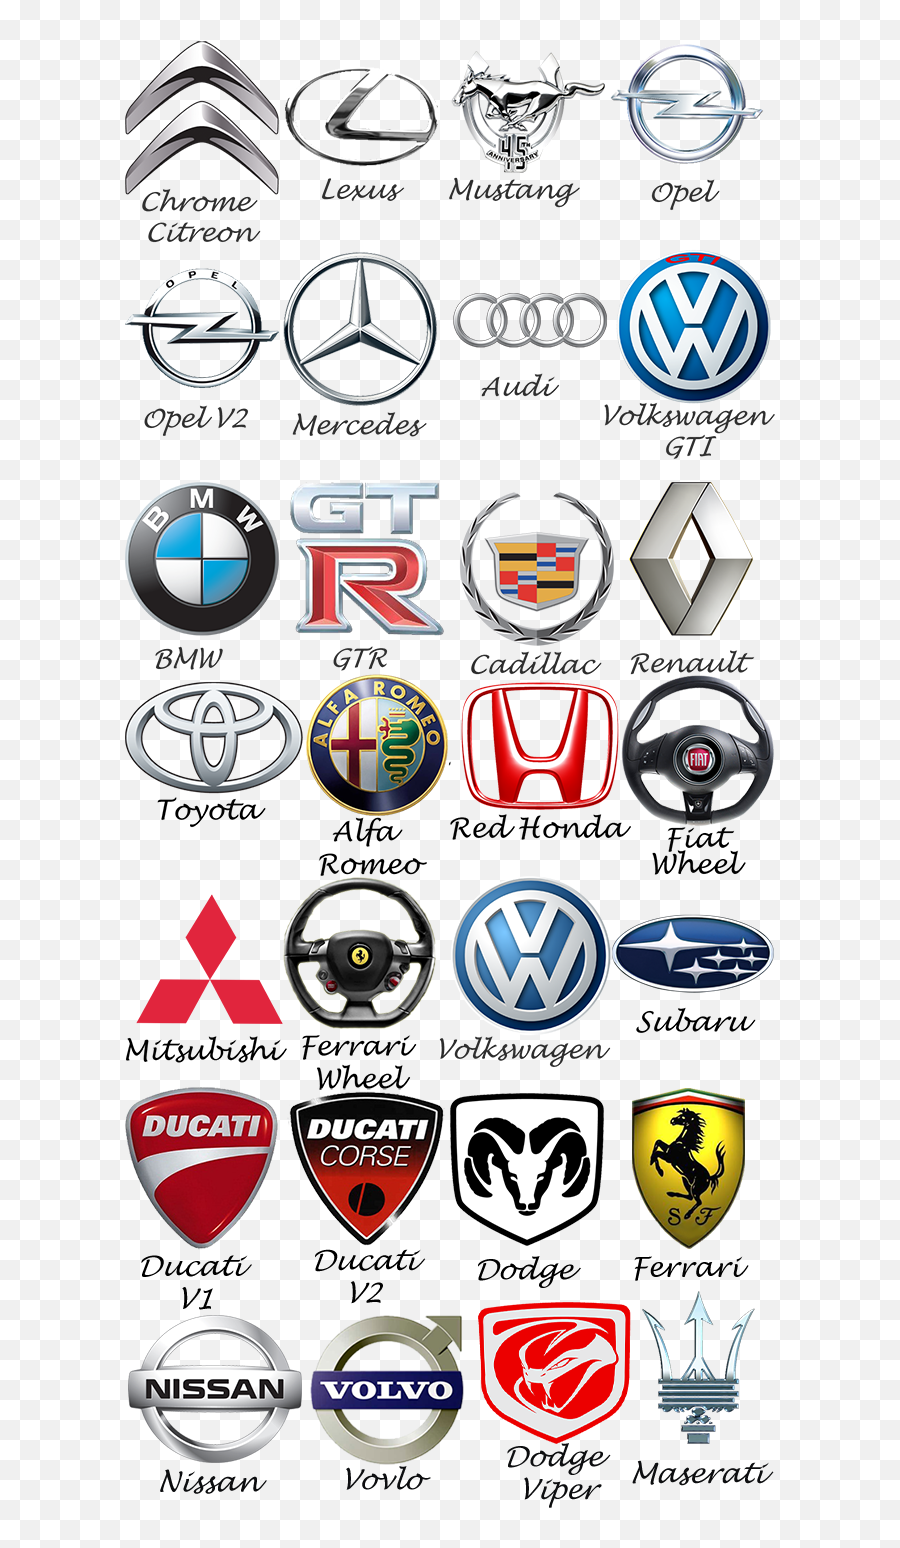 Cars And Their Names List Logo Png - Car Logos And Names List,Car ...